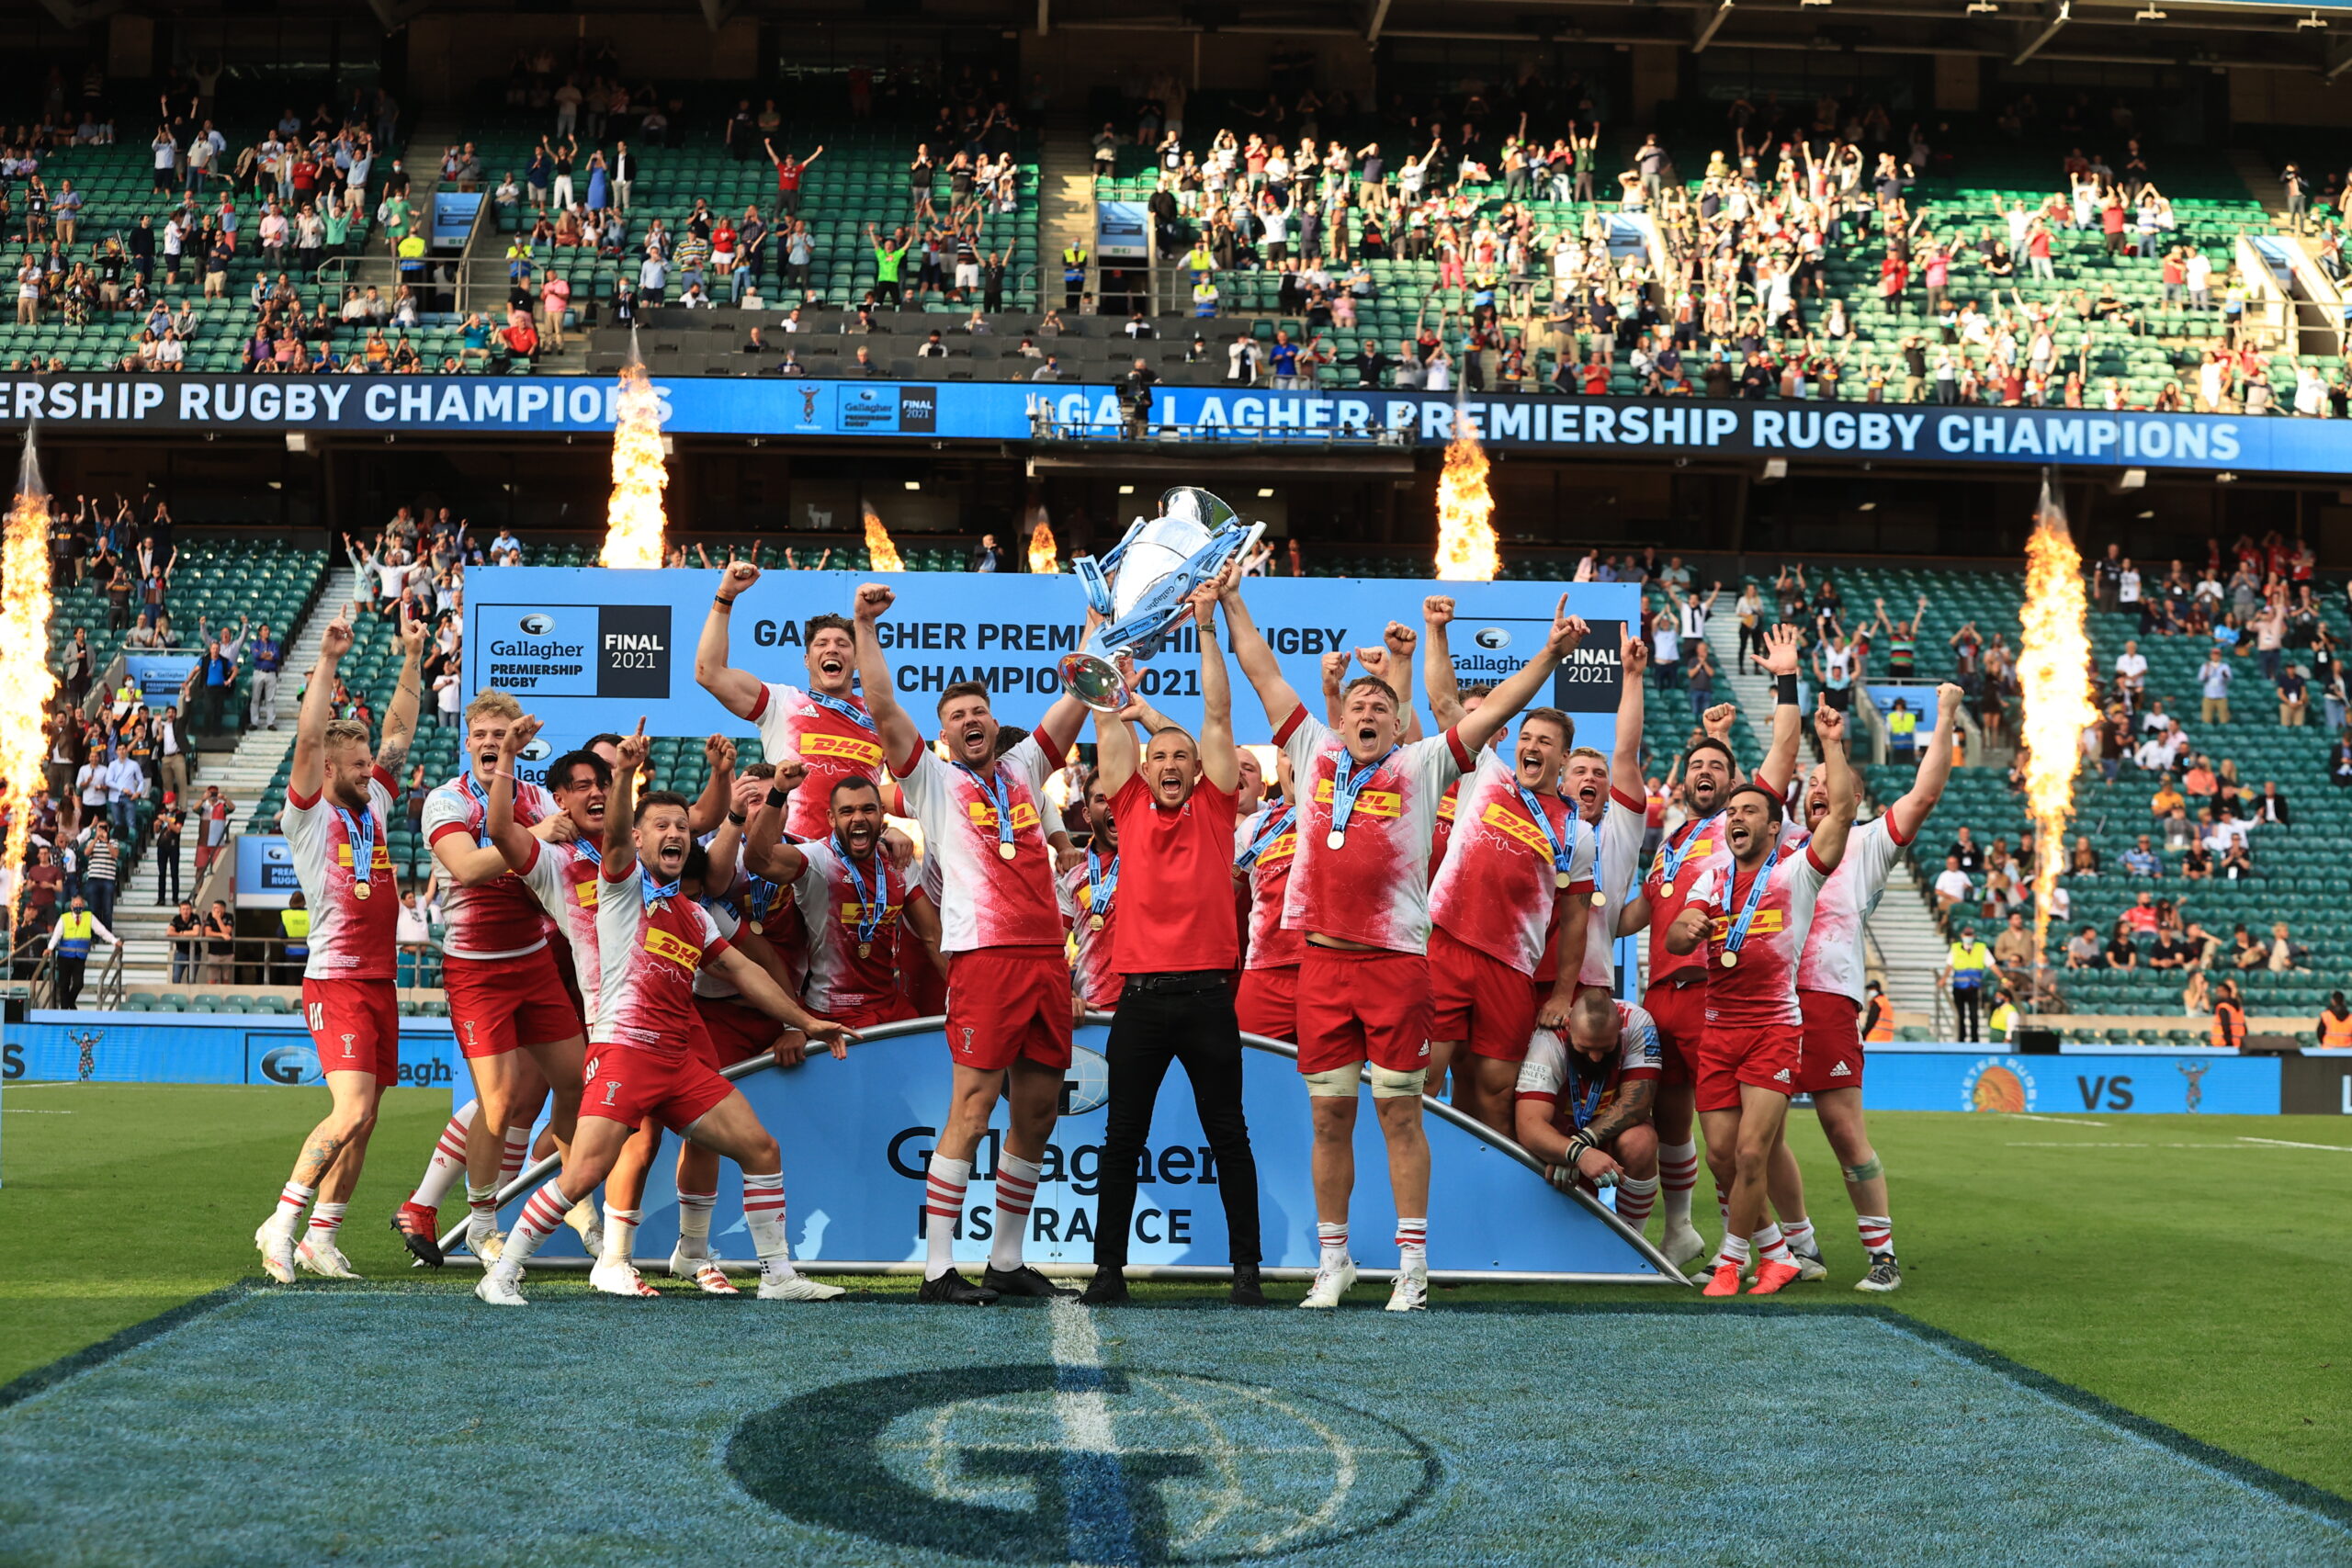 PTI appointed to strategic D2C brief by Premiership Rugby